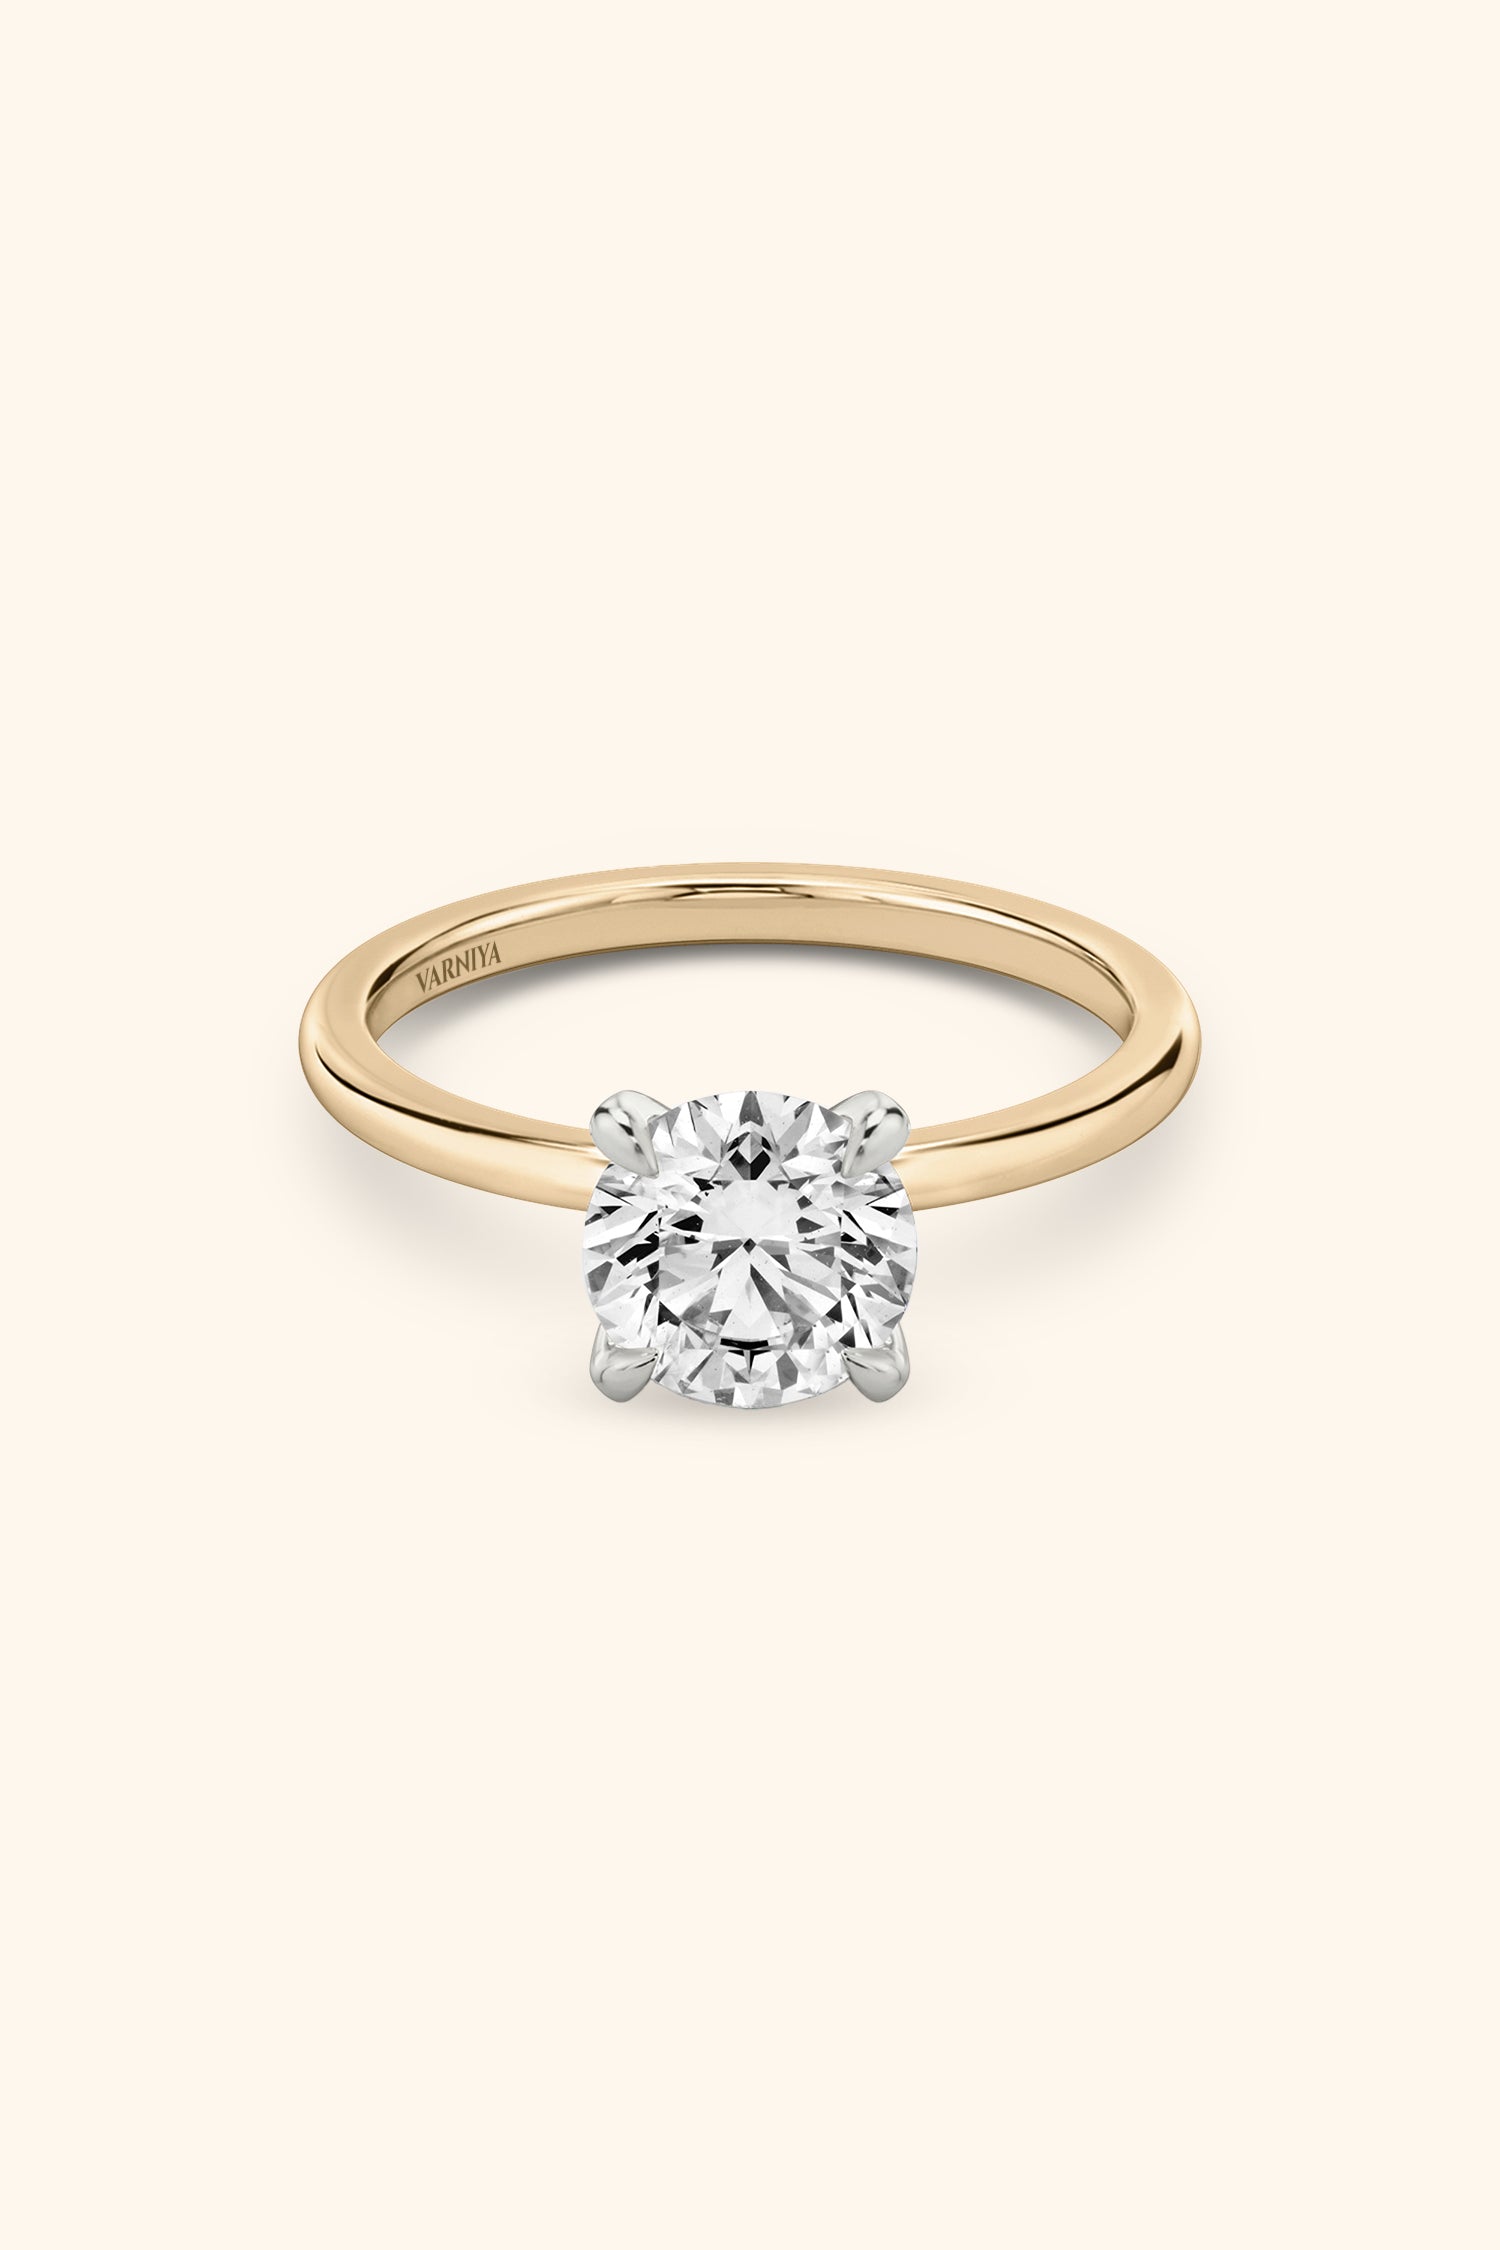 Dual Tone Glance Ring with Round Brilliant Solitaire.